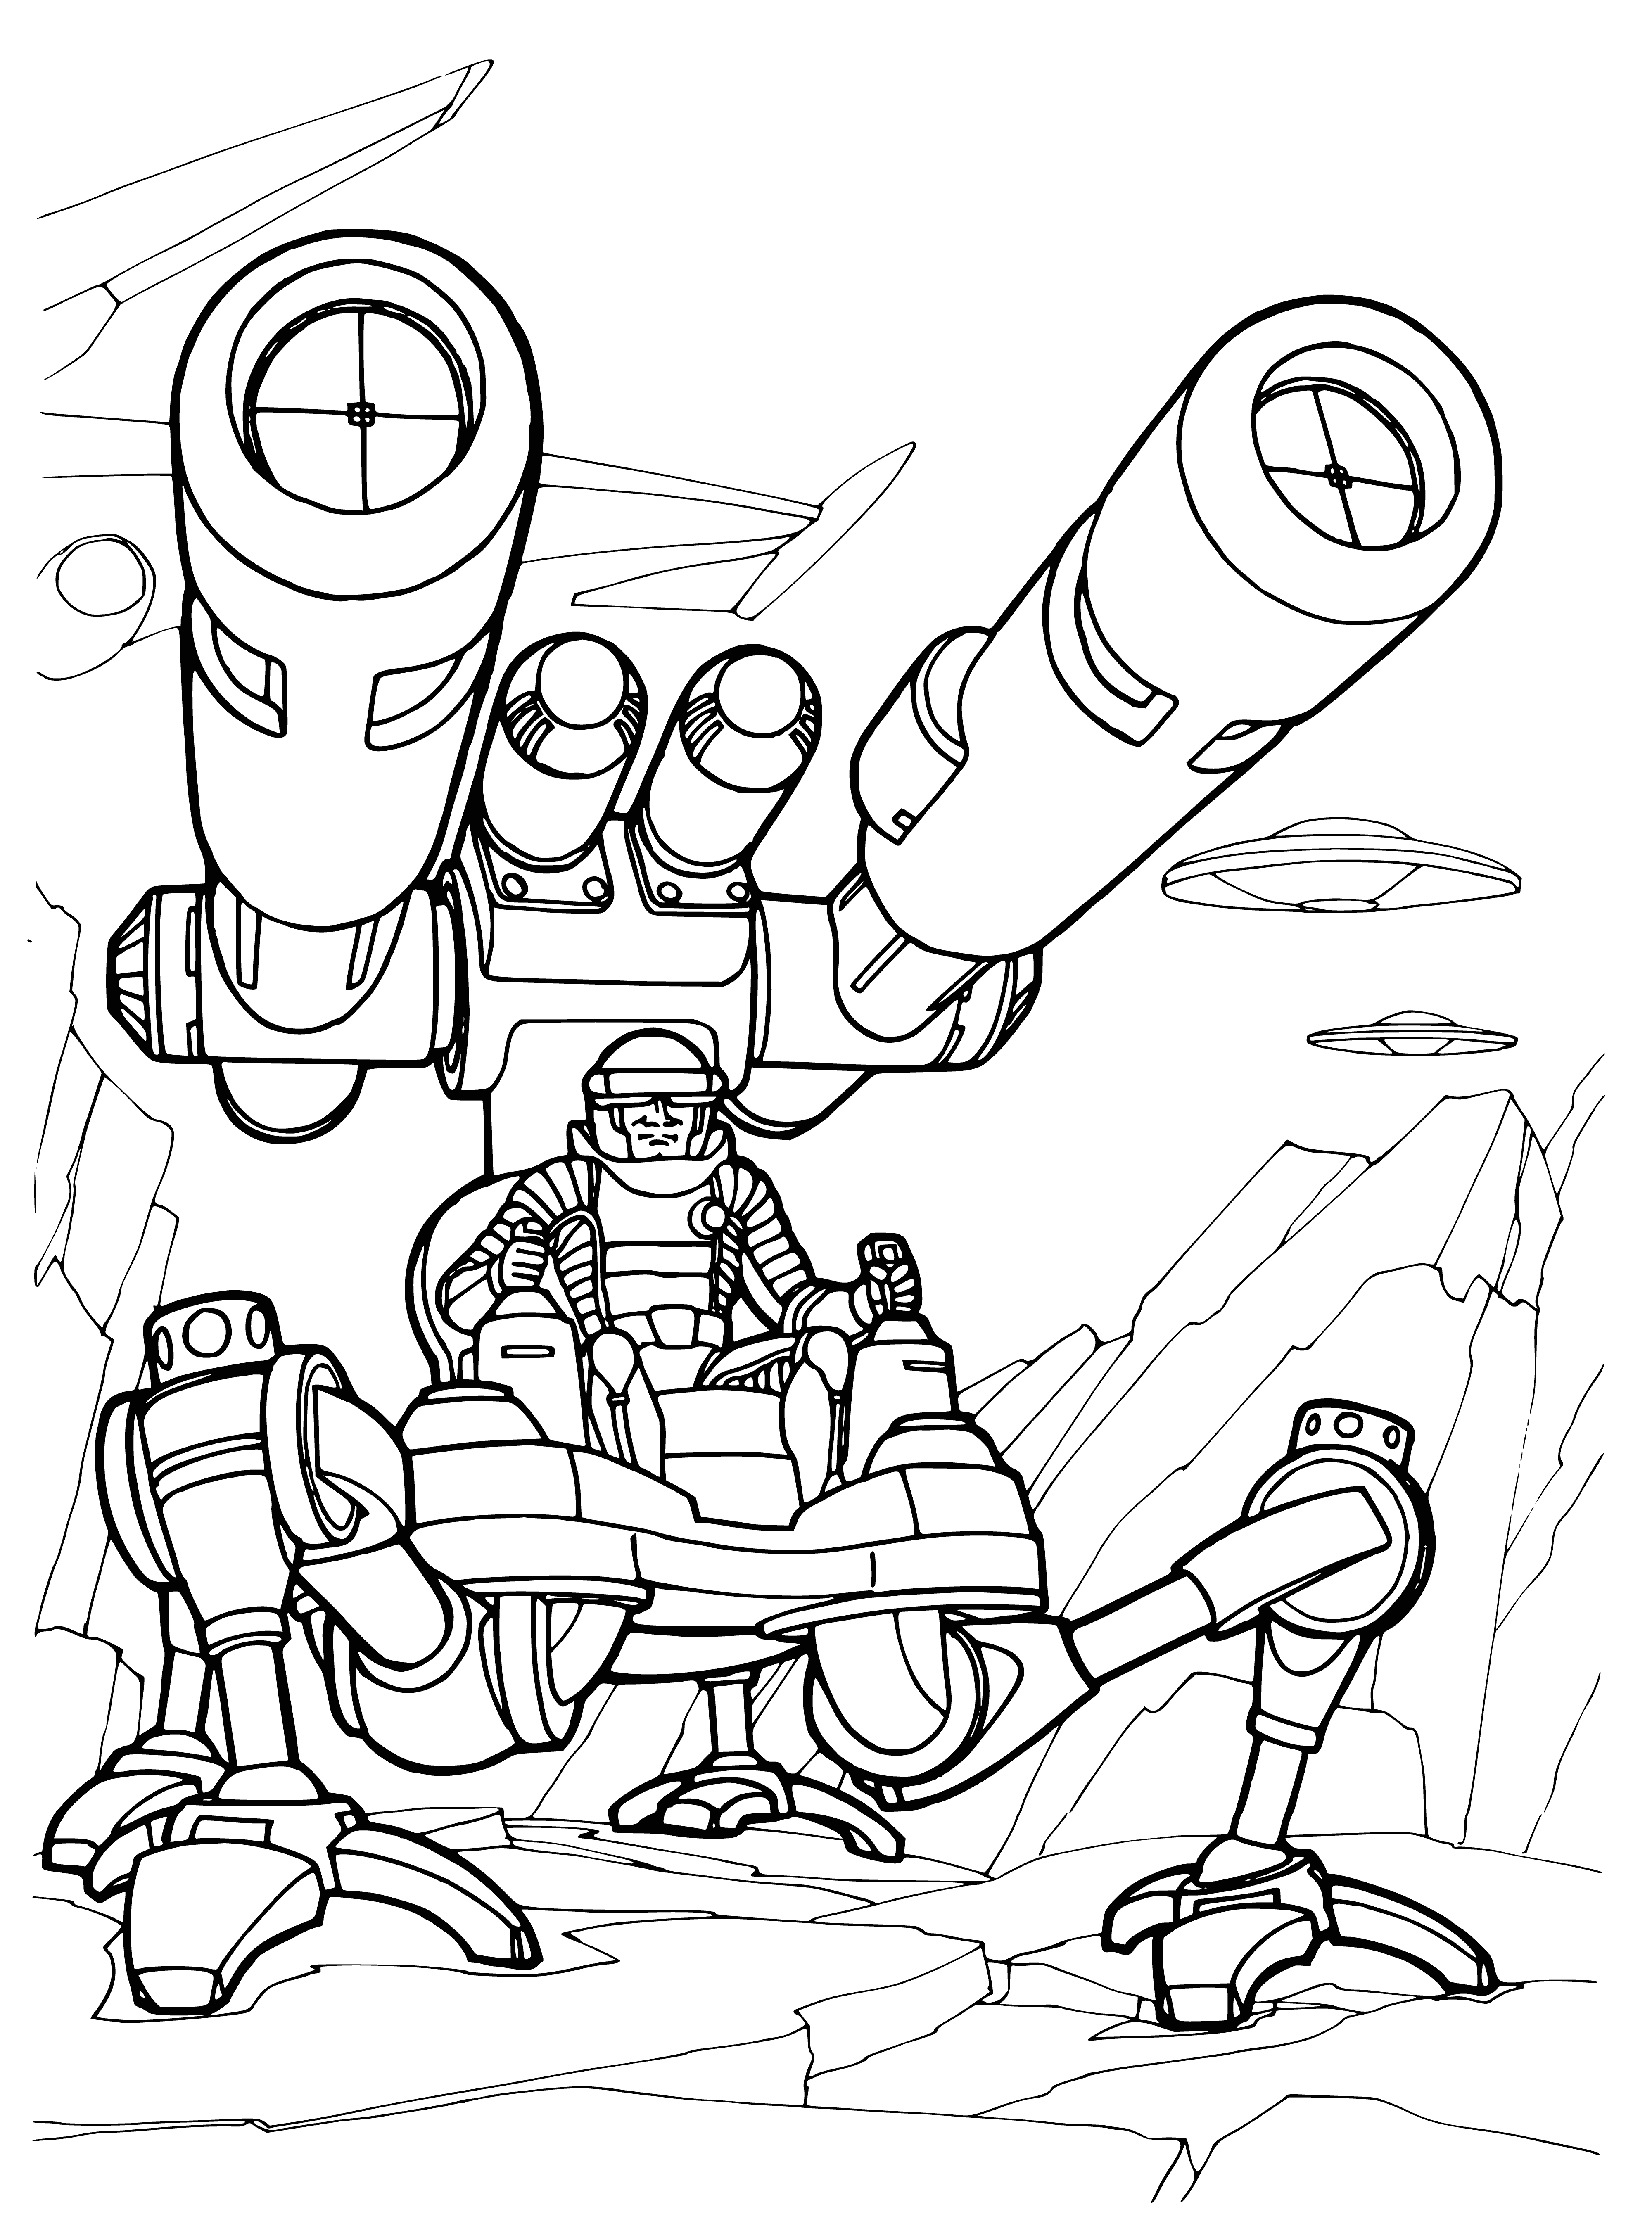 coloring page: Woman struggles to carry a bulky stereo gun with helmet on in military uniform, facing explosions and gunfire in the distance.